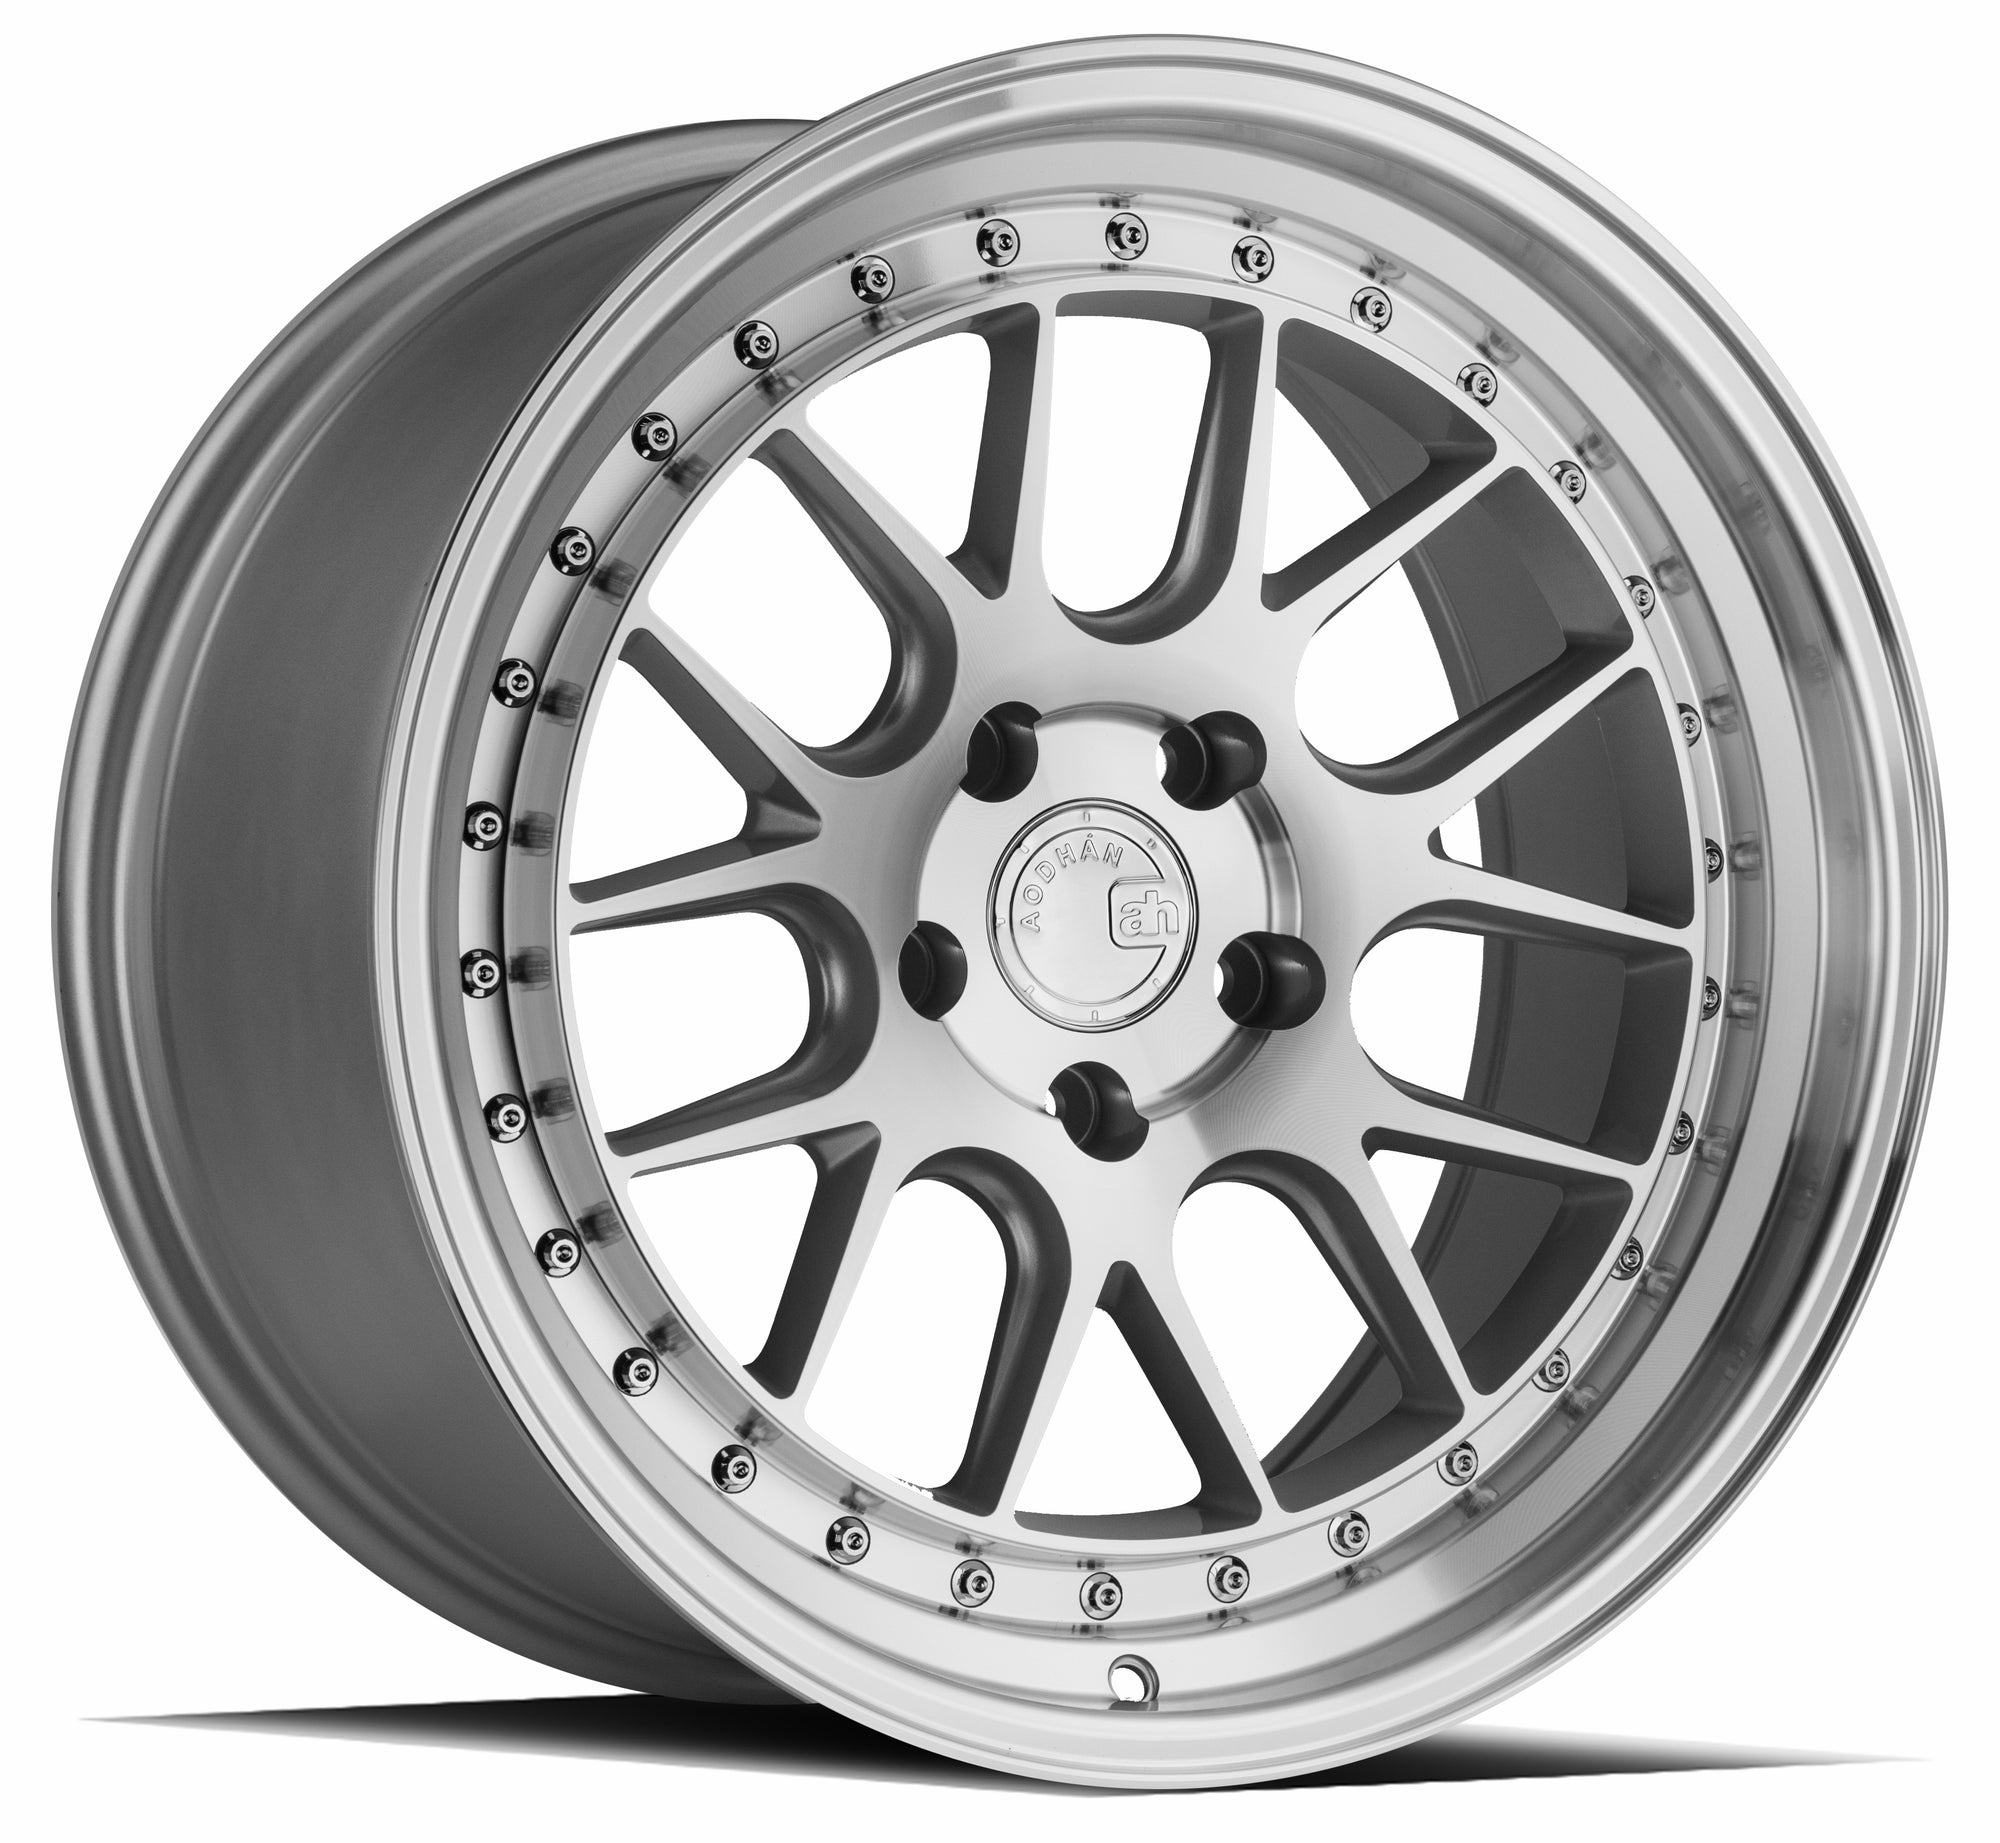 Aodhan DS06 18x8.5 5x114.3 +35 Silver w/Machined Face